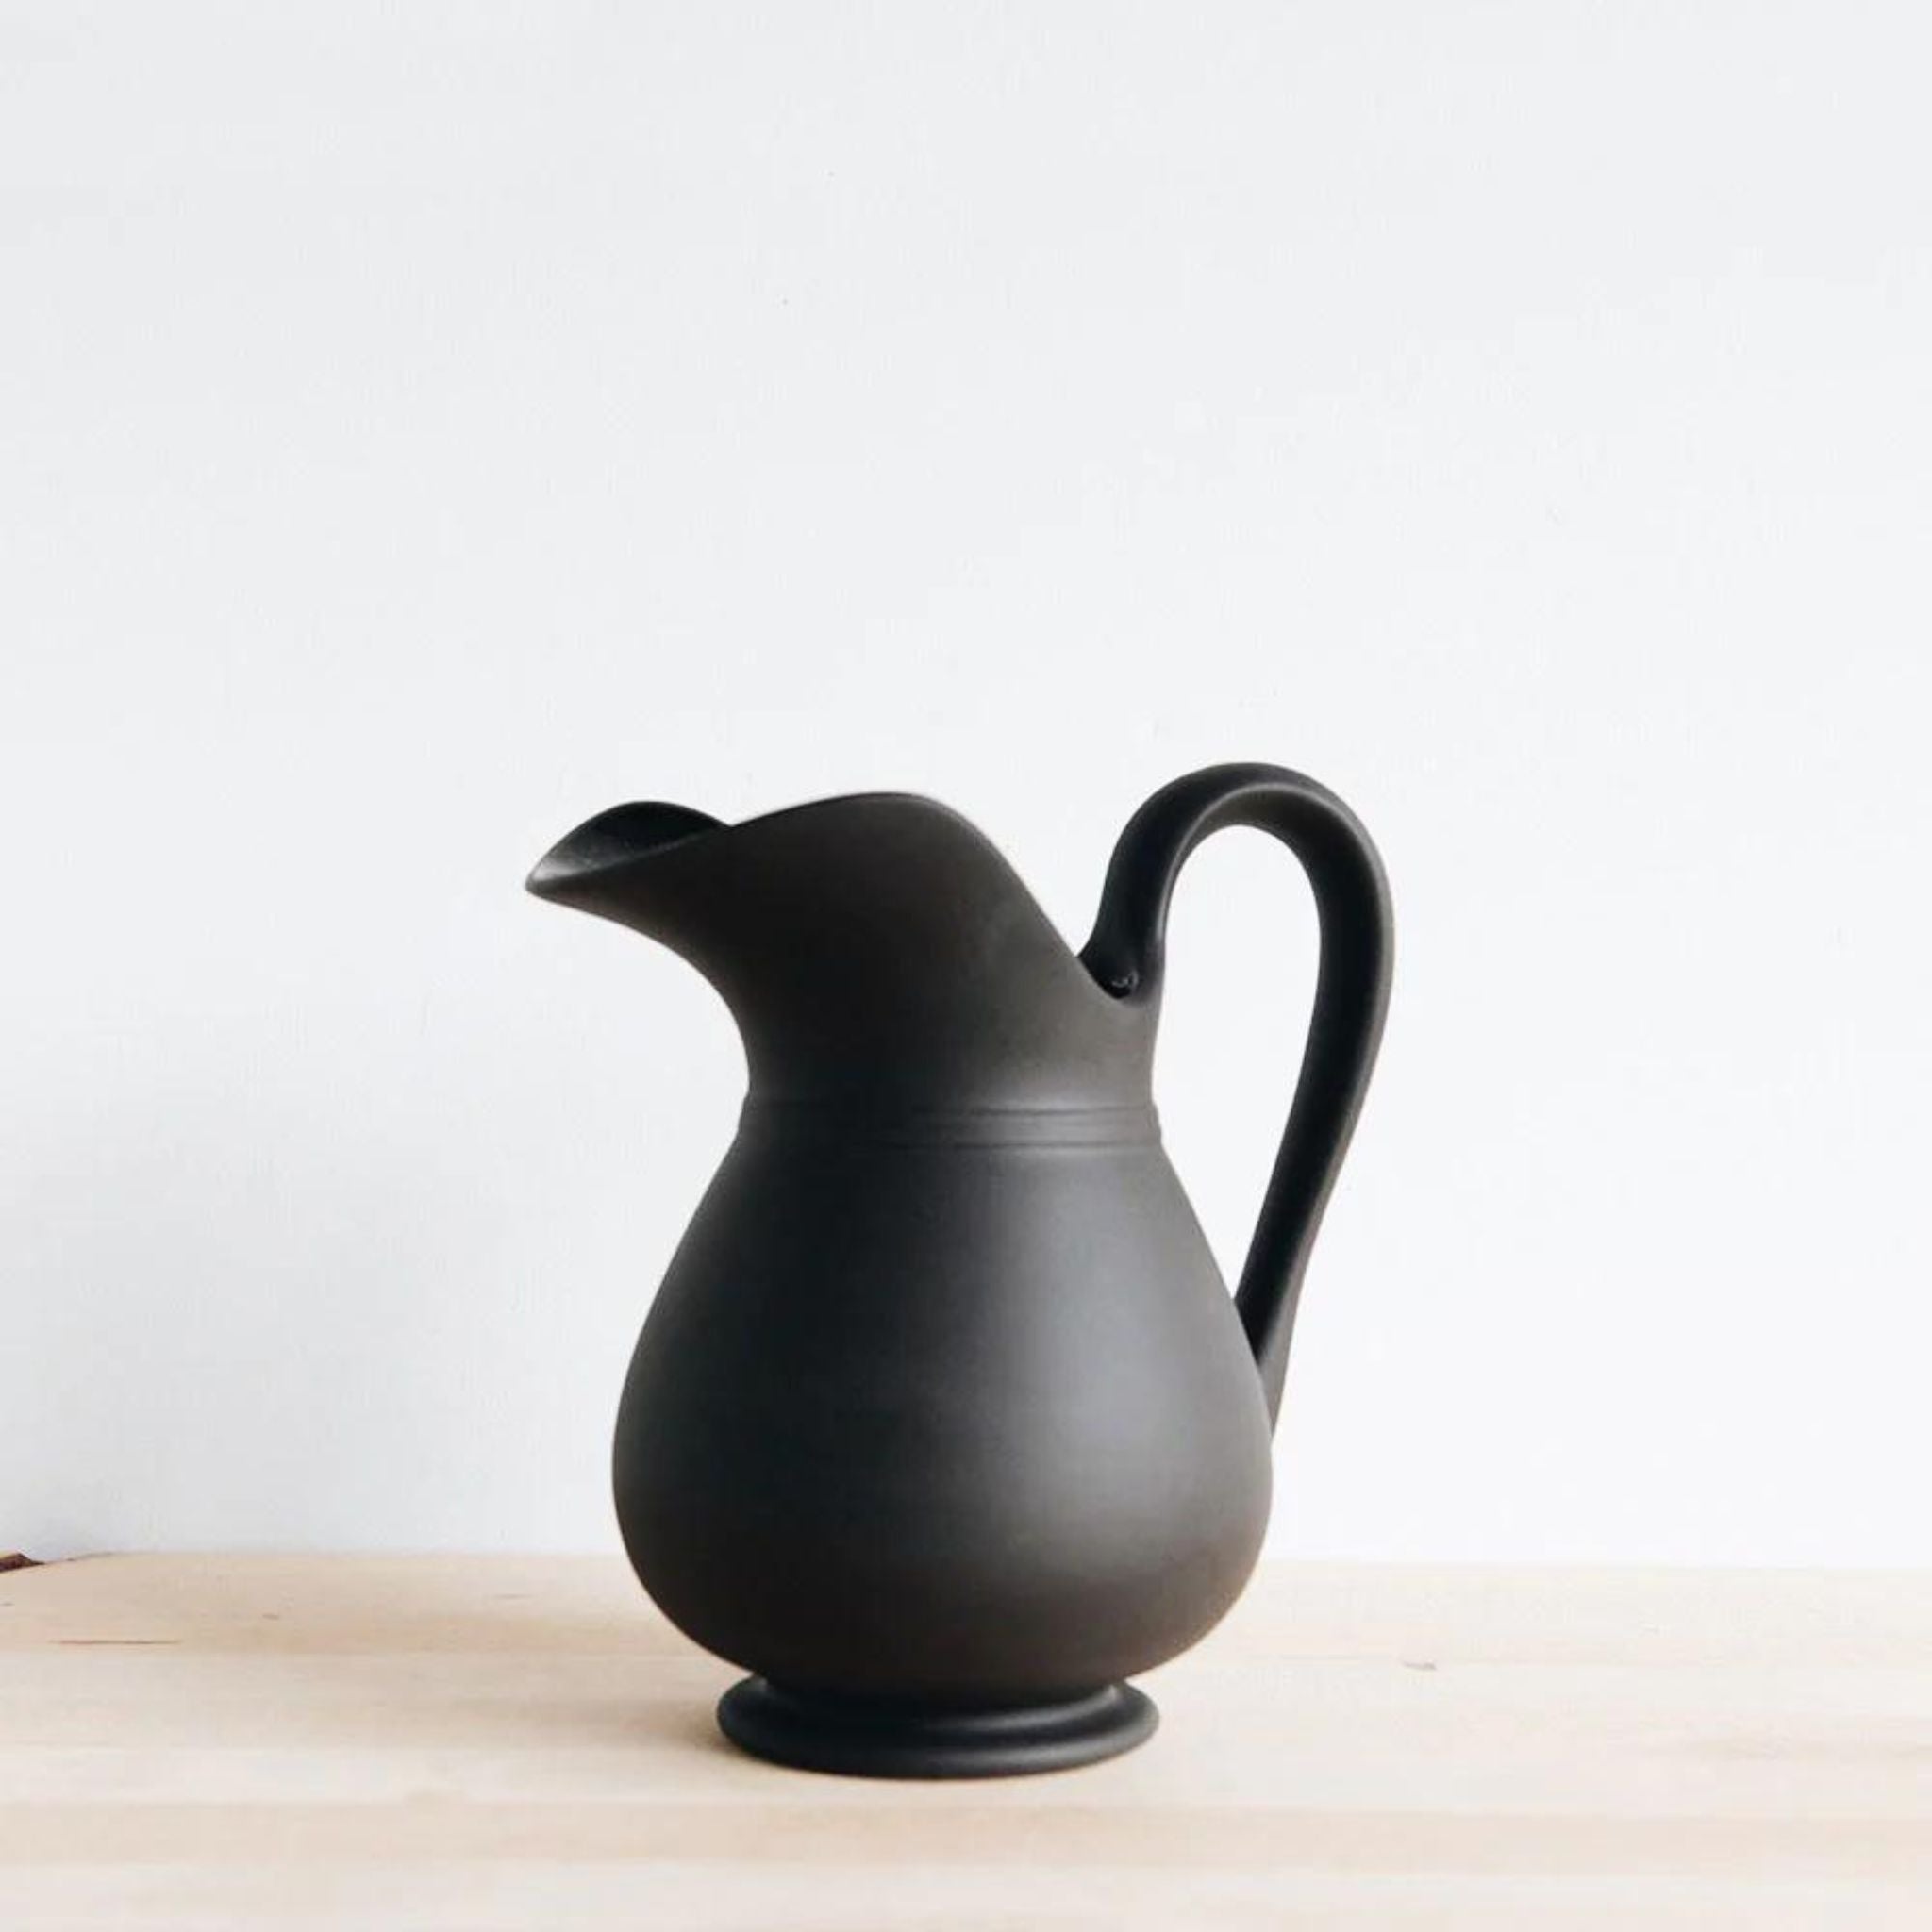 Simply Elevated - Stoneware pitcher meticulously carved by hand and then slip-cast in Sri Lanka. Available in a matte black terracotta with a shiny glazed interior. We love them for serving drinks, holding flowers, or standing proud on the mantel.